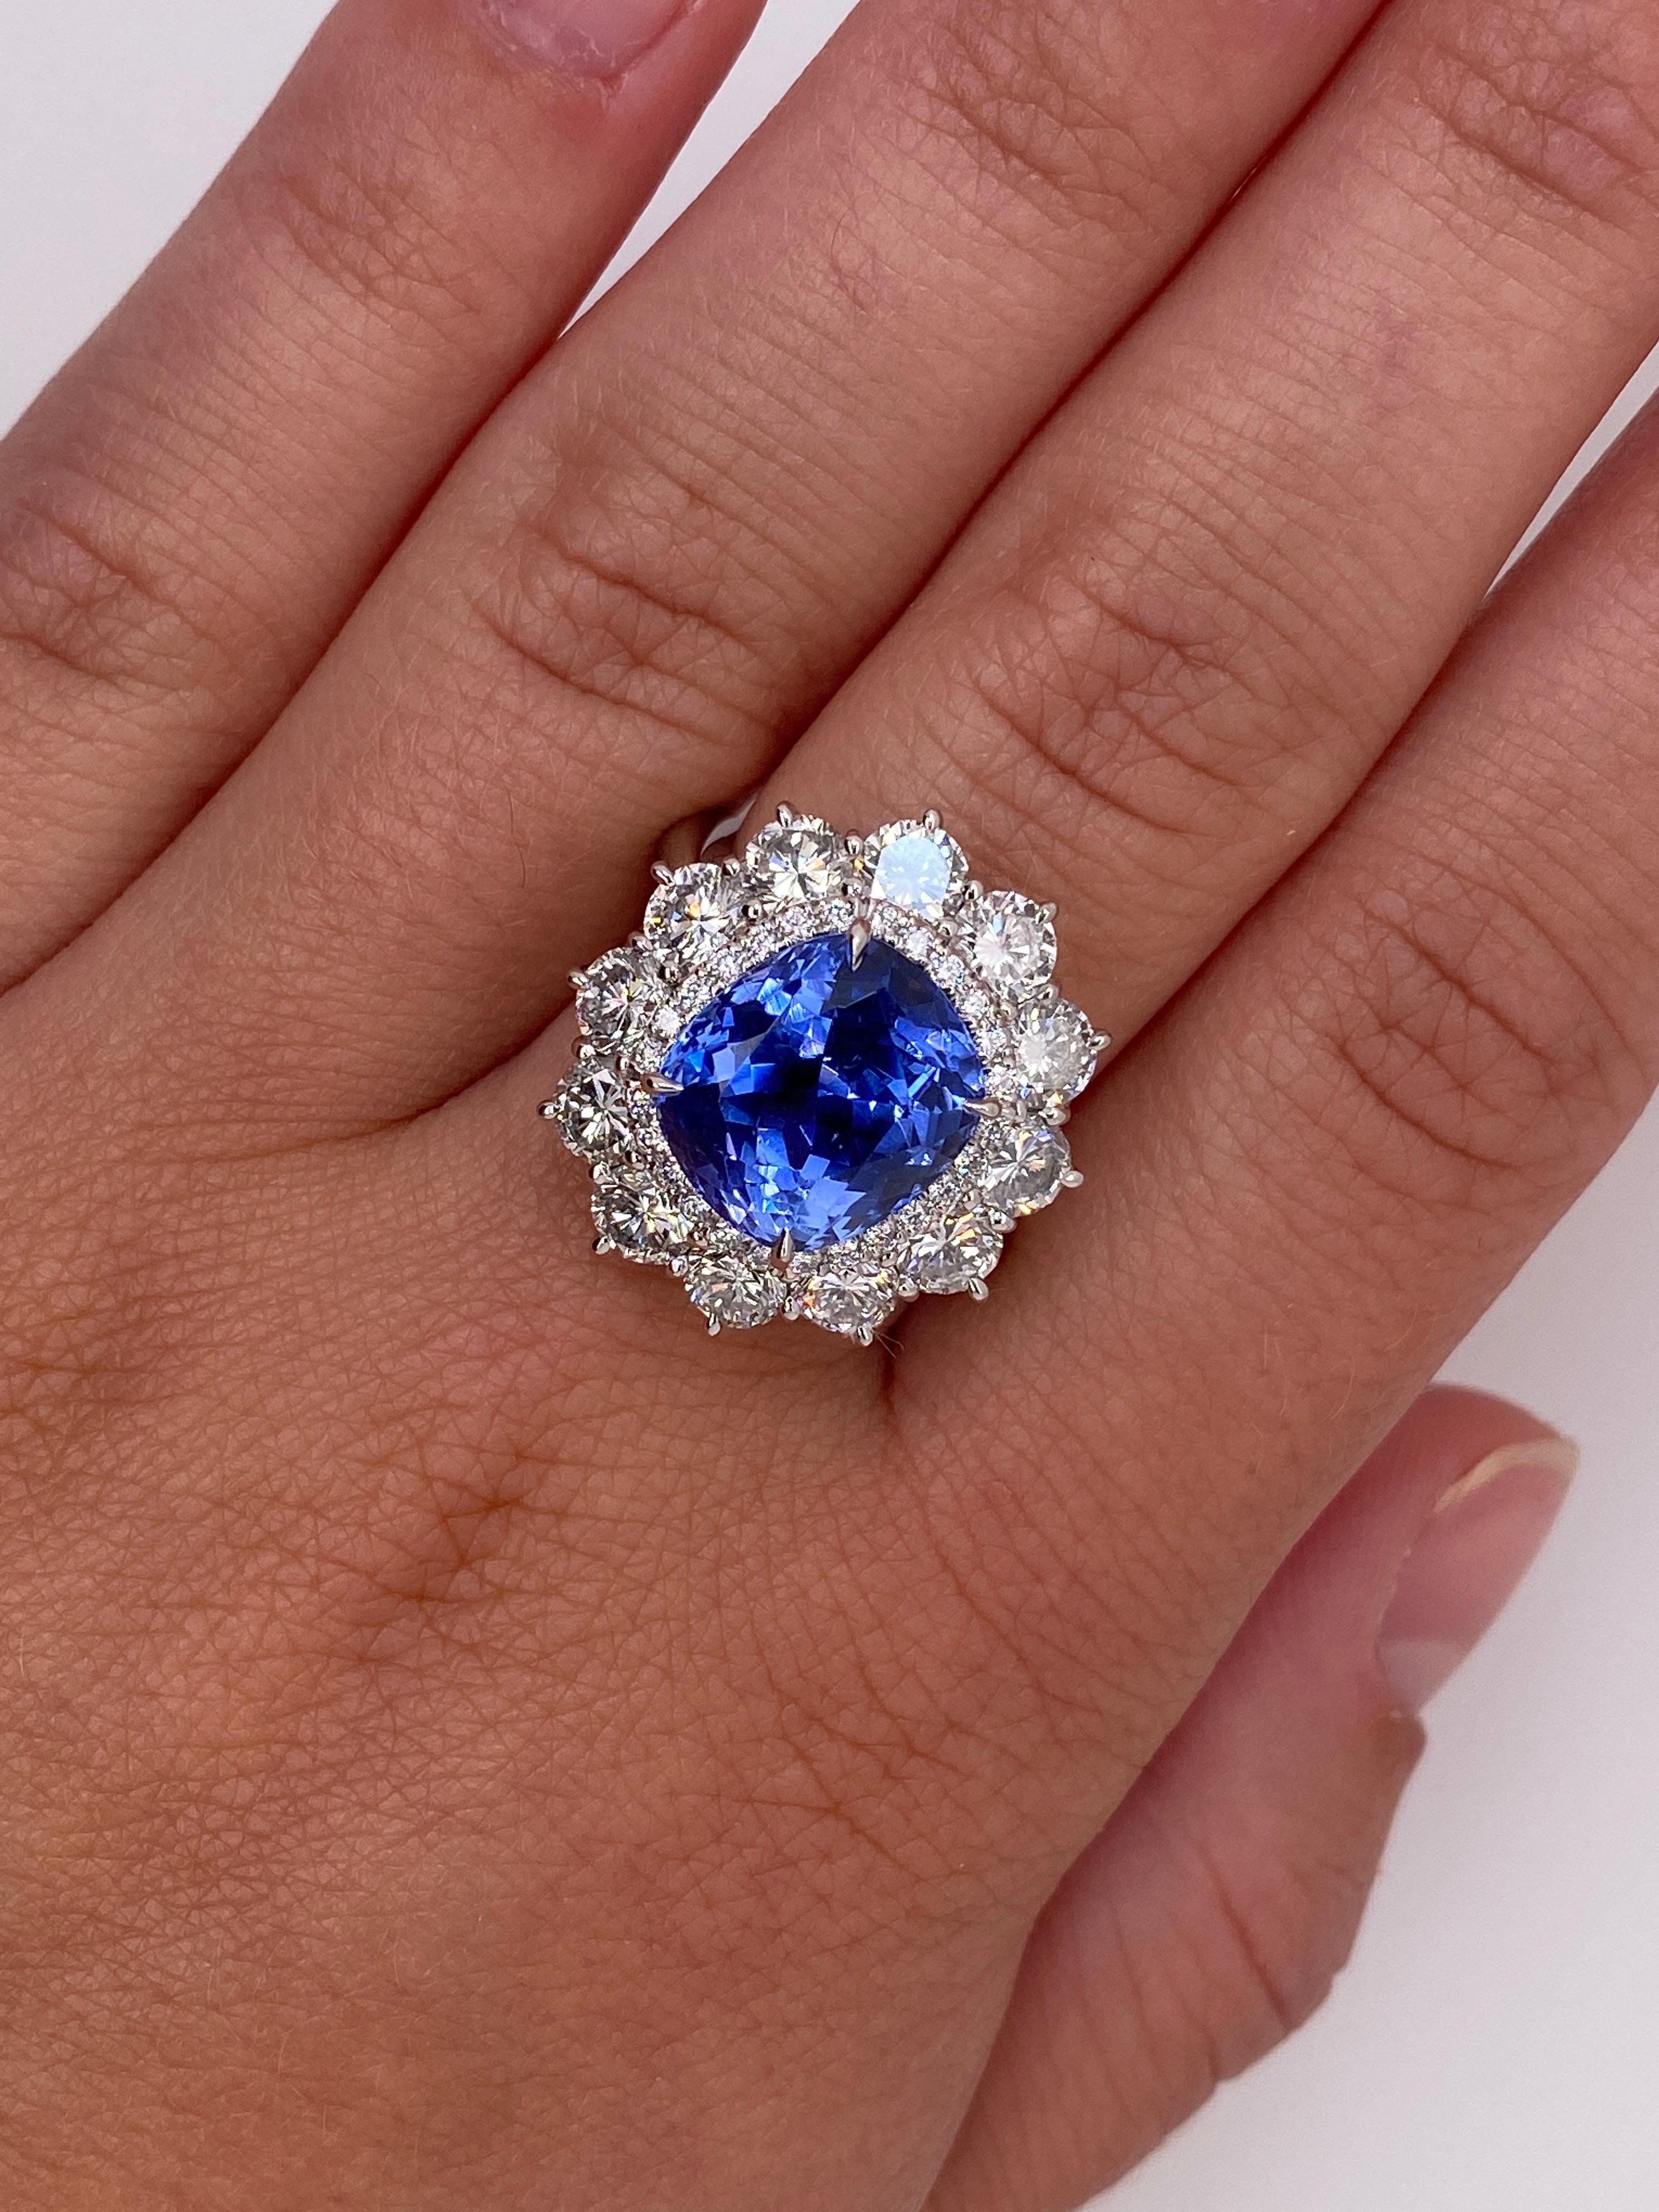 7.40 carat cushion blue sapphire (NH) with 12 round diamonds 2.92 carats and .21 carats of round melee diamonds set in a platinum ring. Size 7